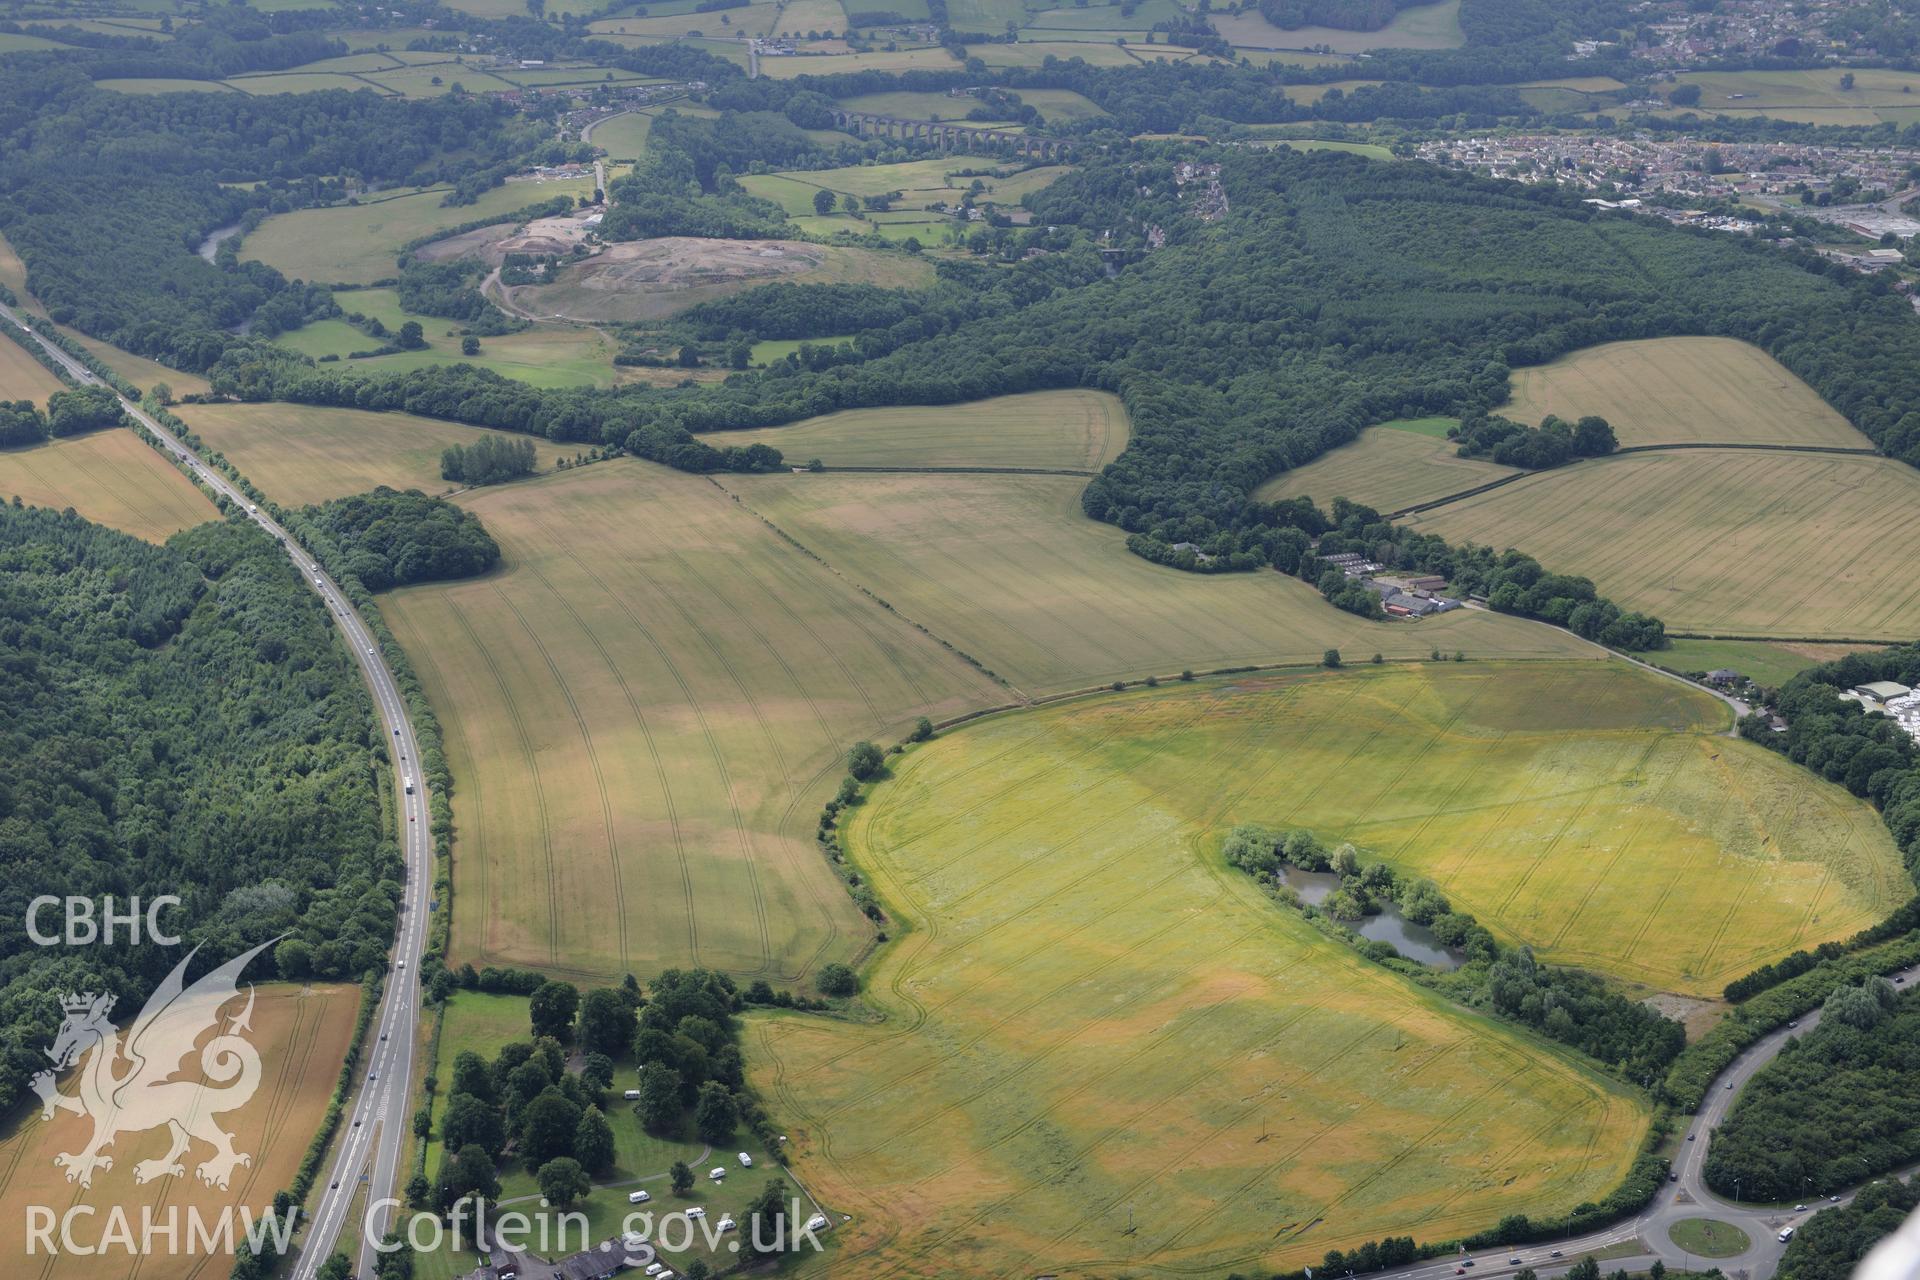 Landscape view showing Cefn Mawr, Cefn Bychan Viaduct and a section of Offa's Dyke north of Home Farm. Oblique aerial photograph taken during the Royal Commission's programme of archaeological aerial reconnaissance by Toby Driver on 30th July 2015.